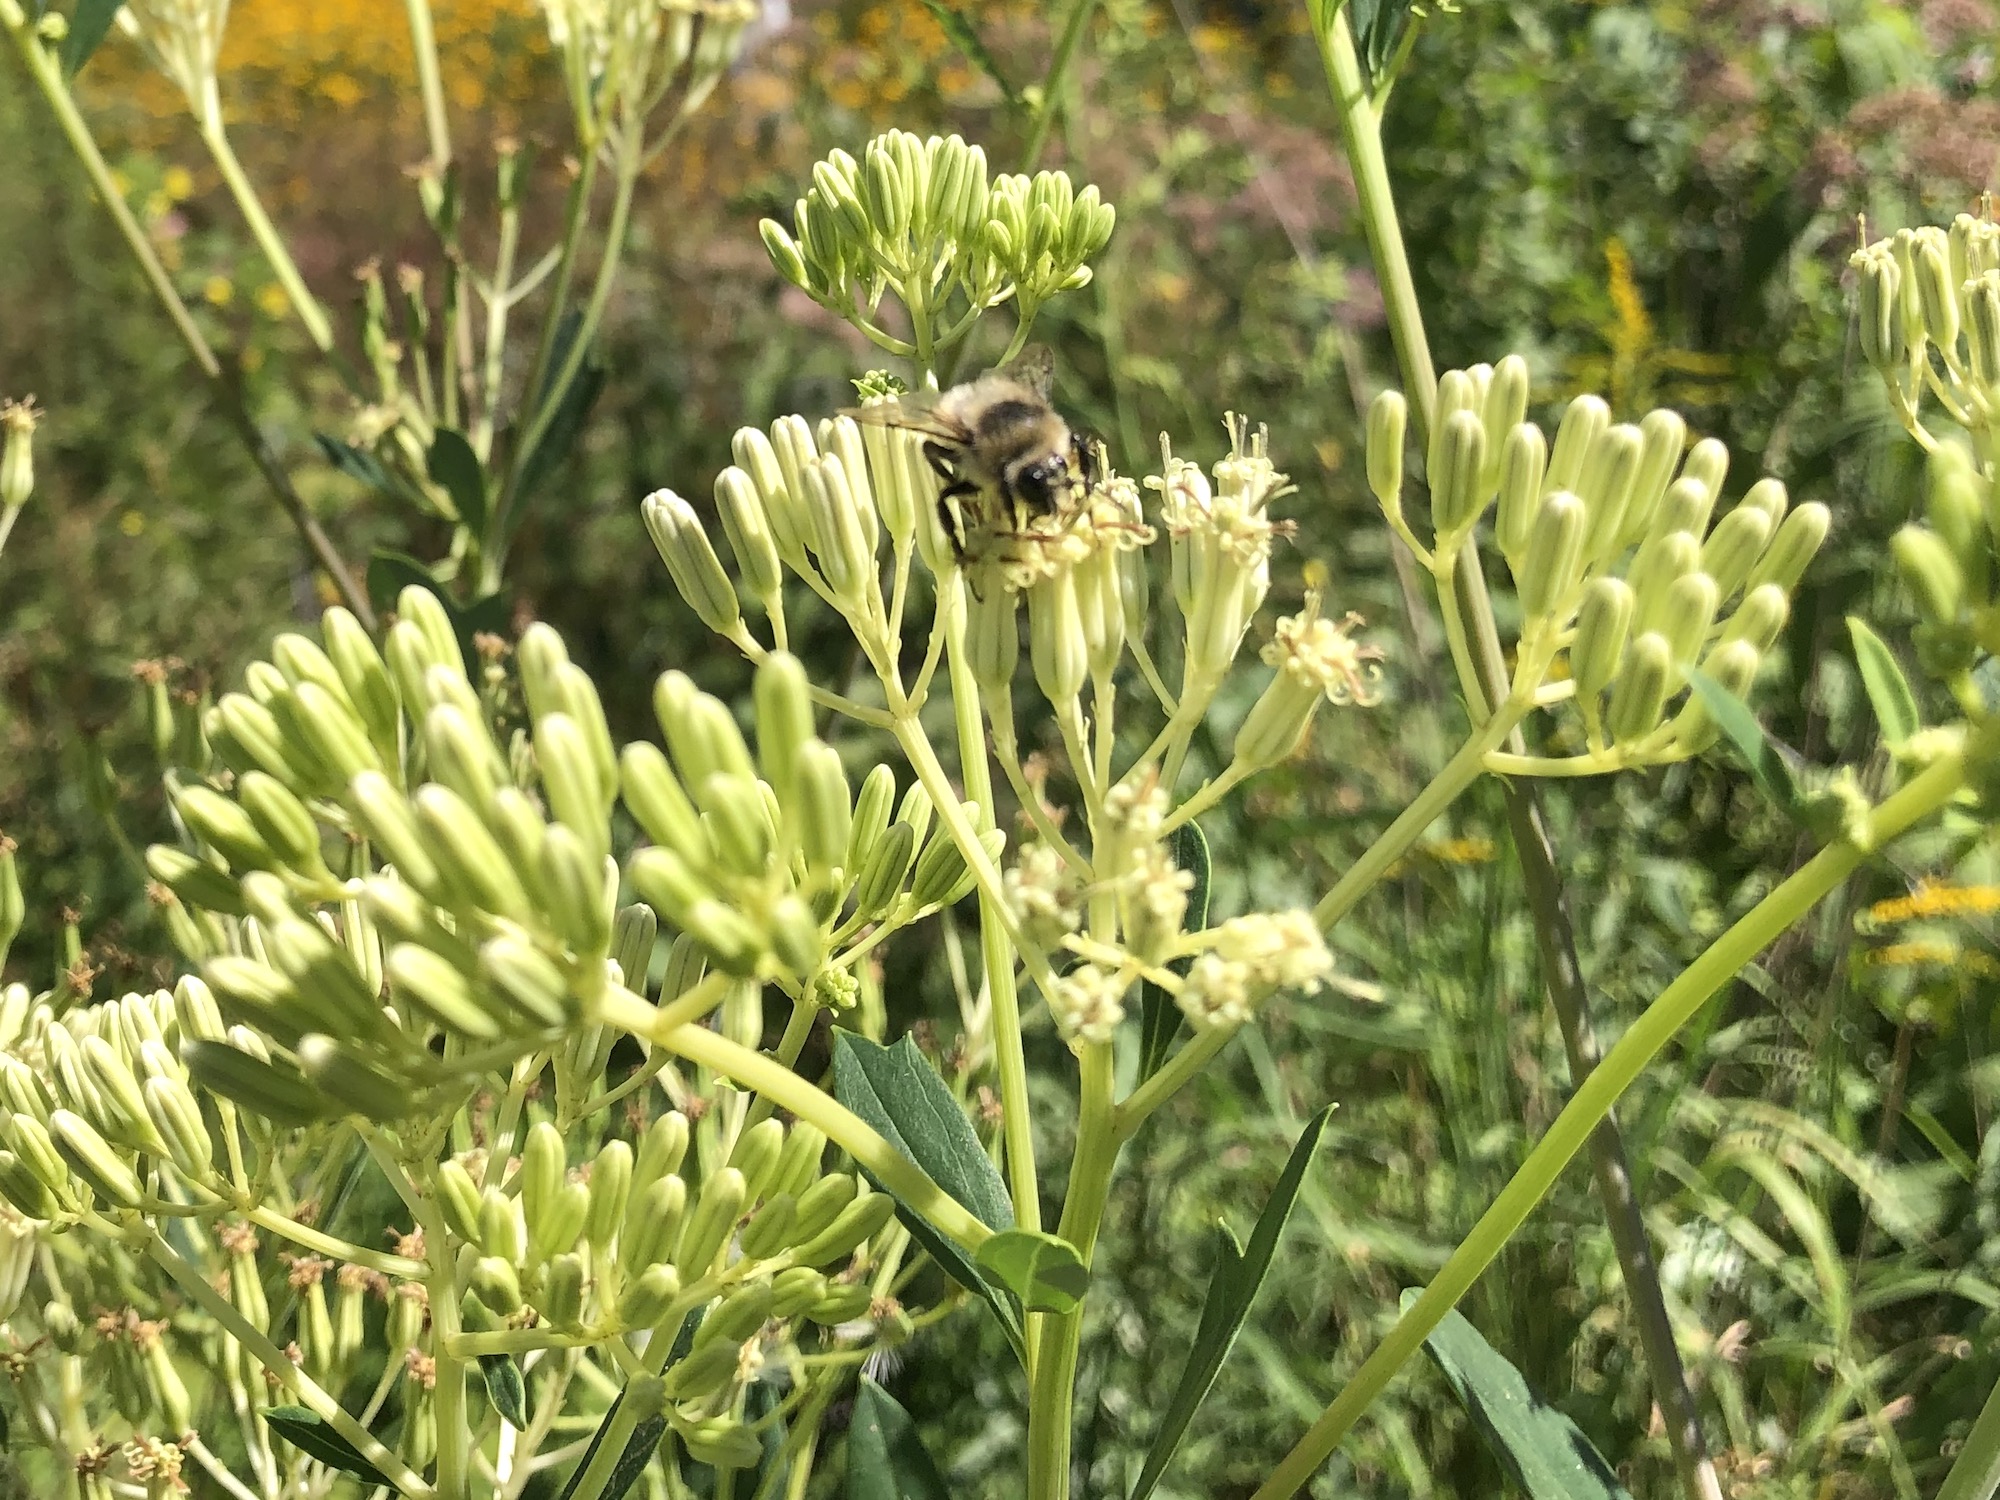 Bumblebee on Indian Plantain on August 19, 2020.